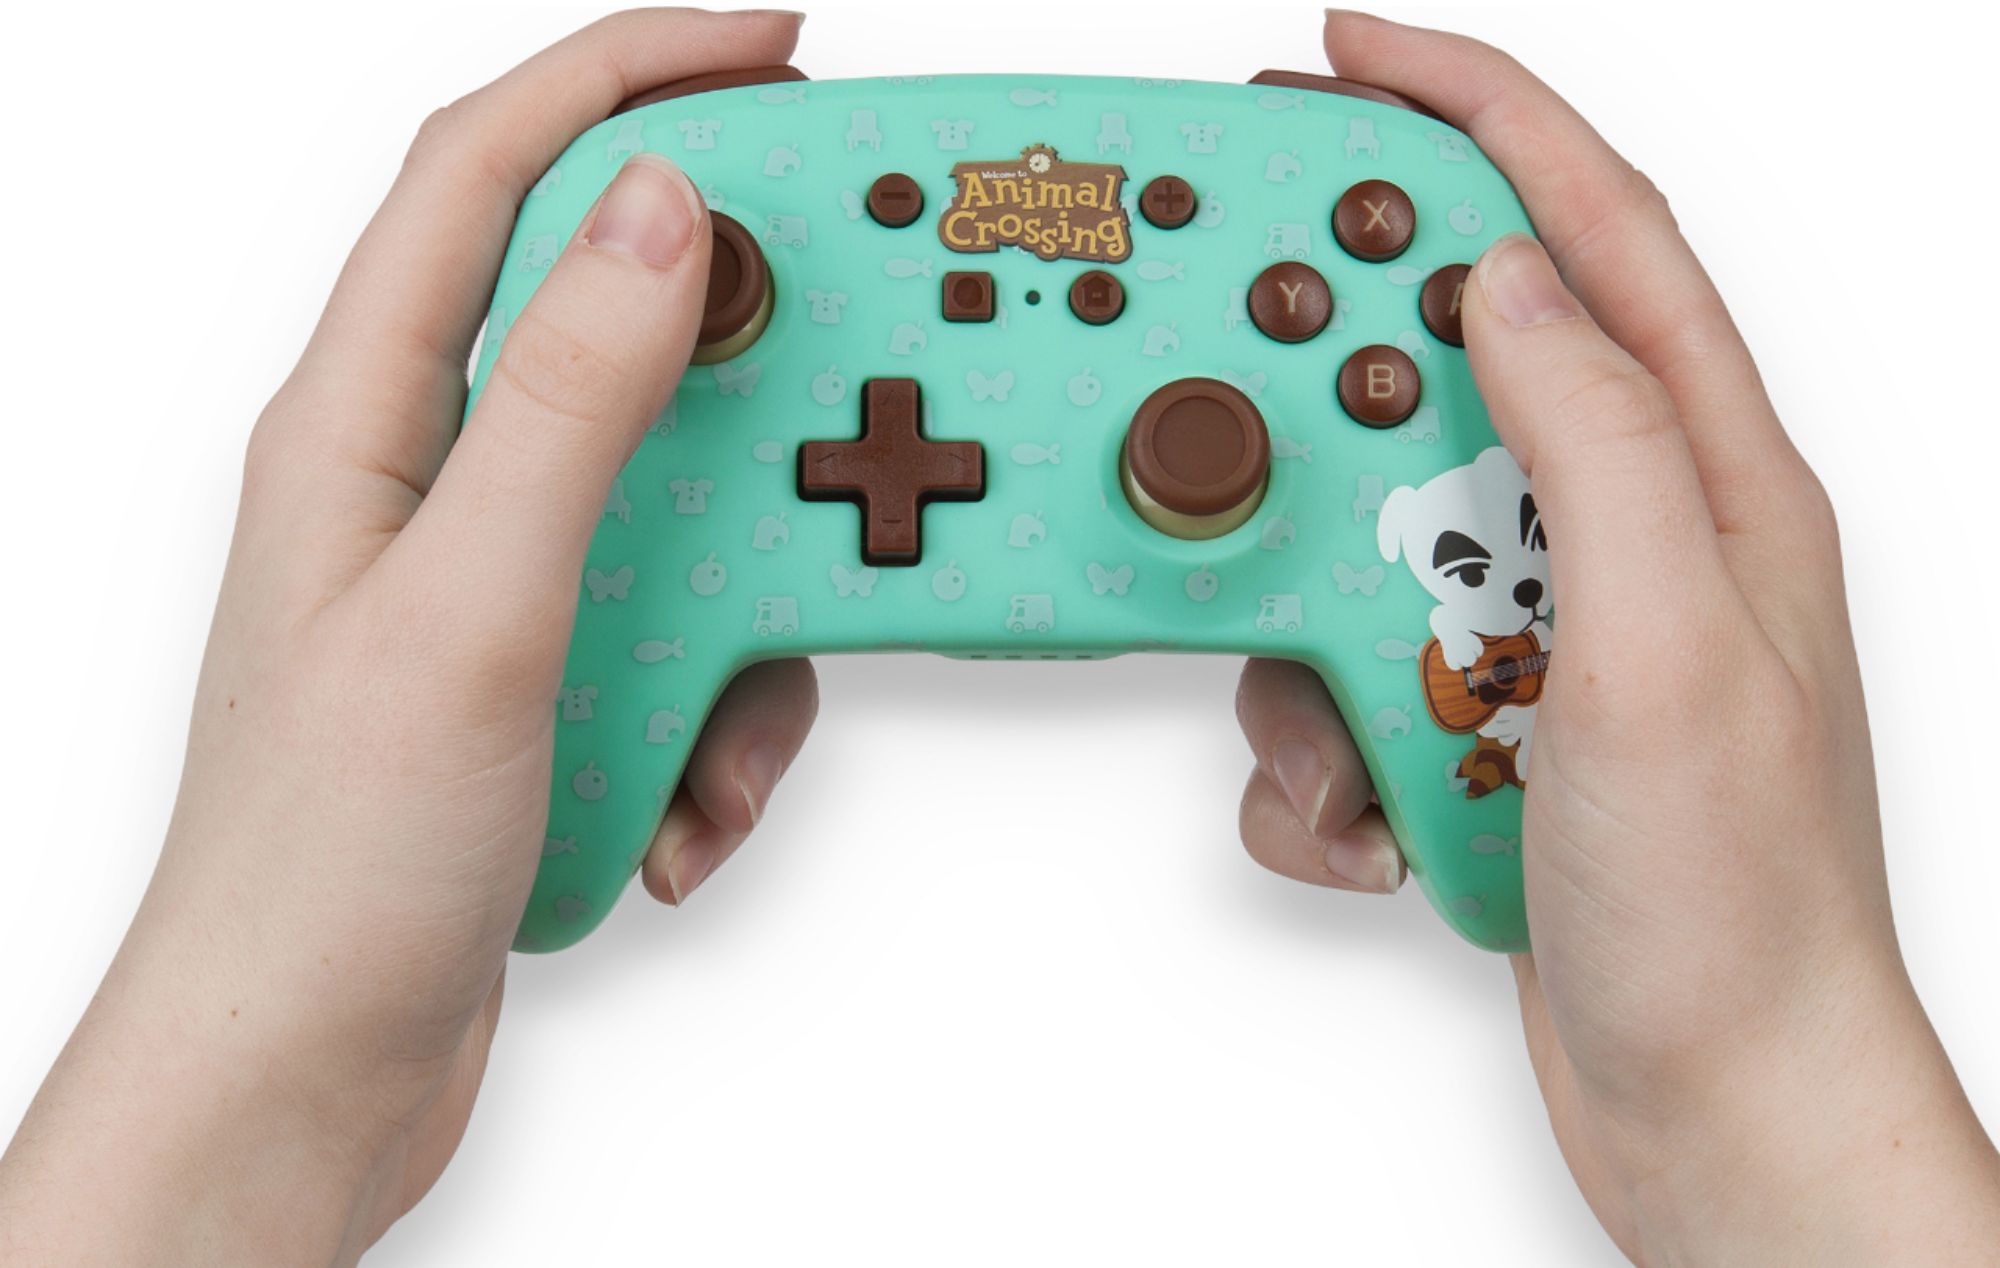 animal crossing wireless switch controller